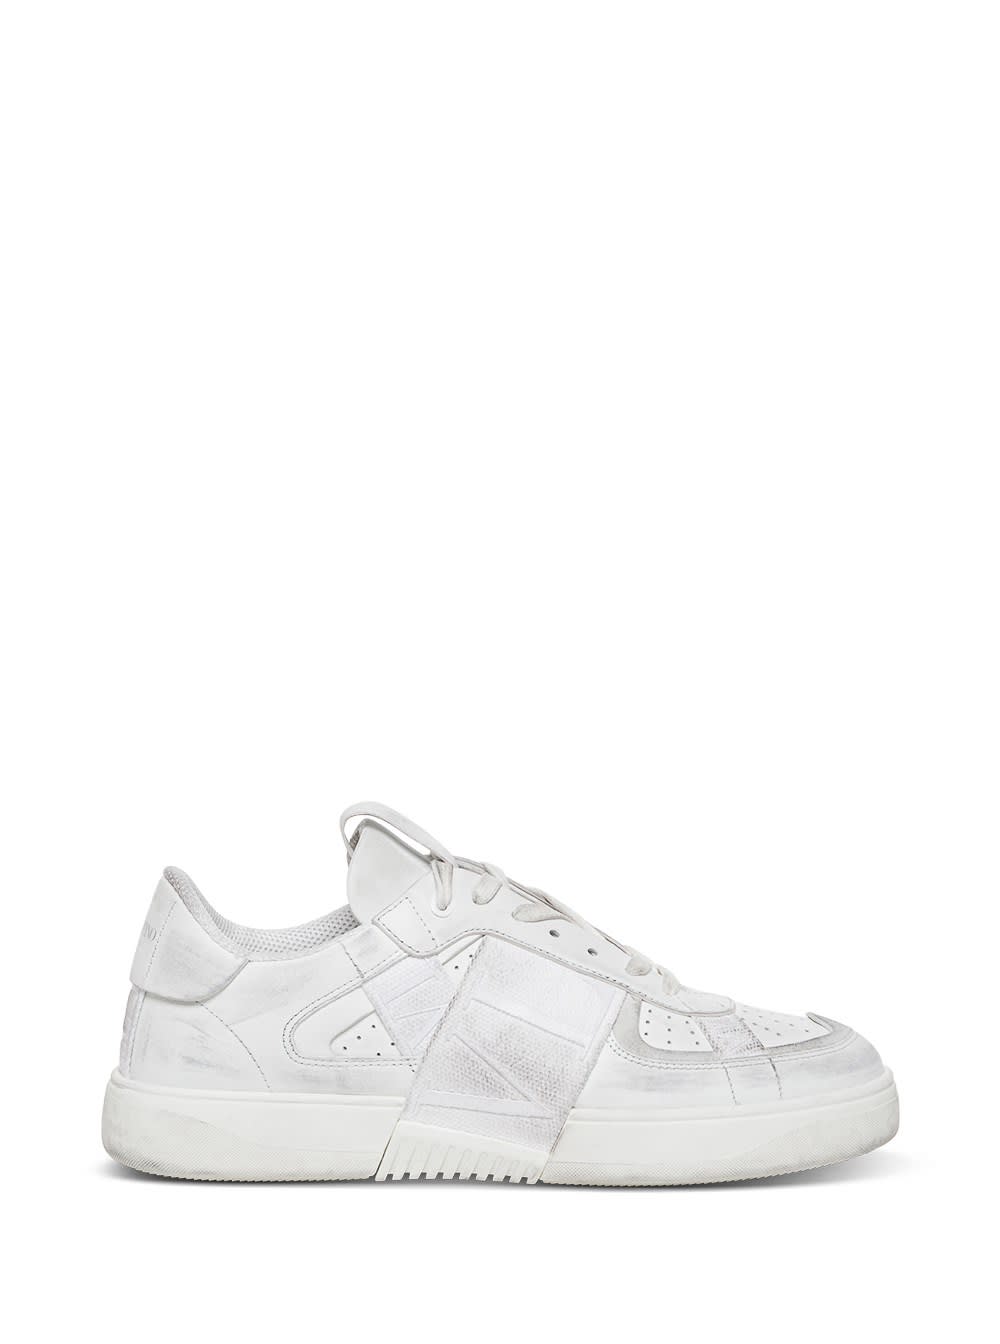 Valentino Garavani Vl7n Sneakers In Leather And Fabric